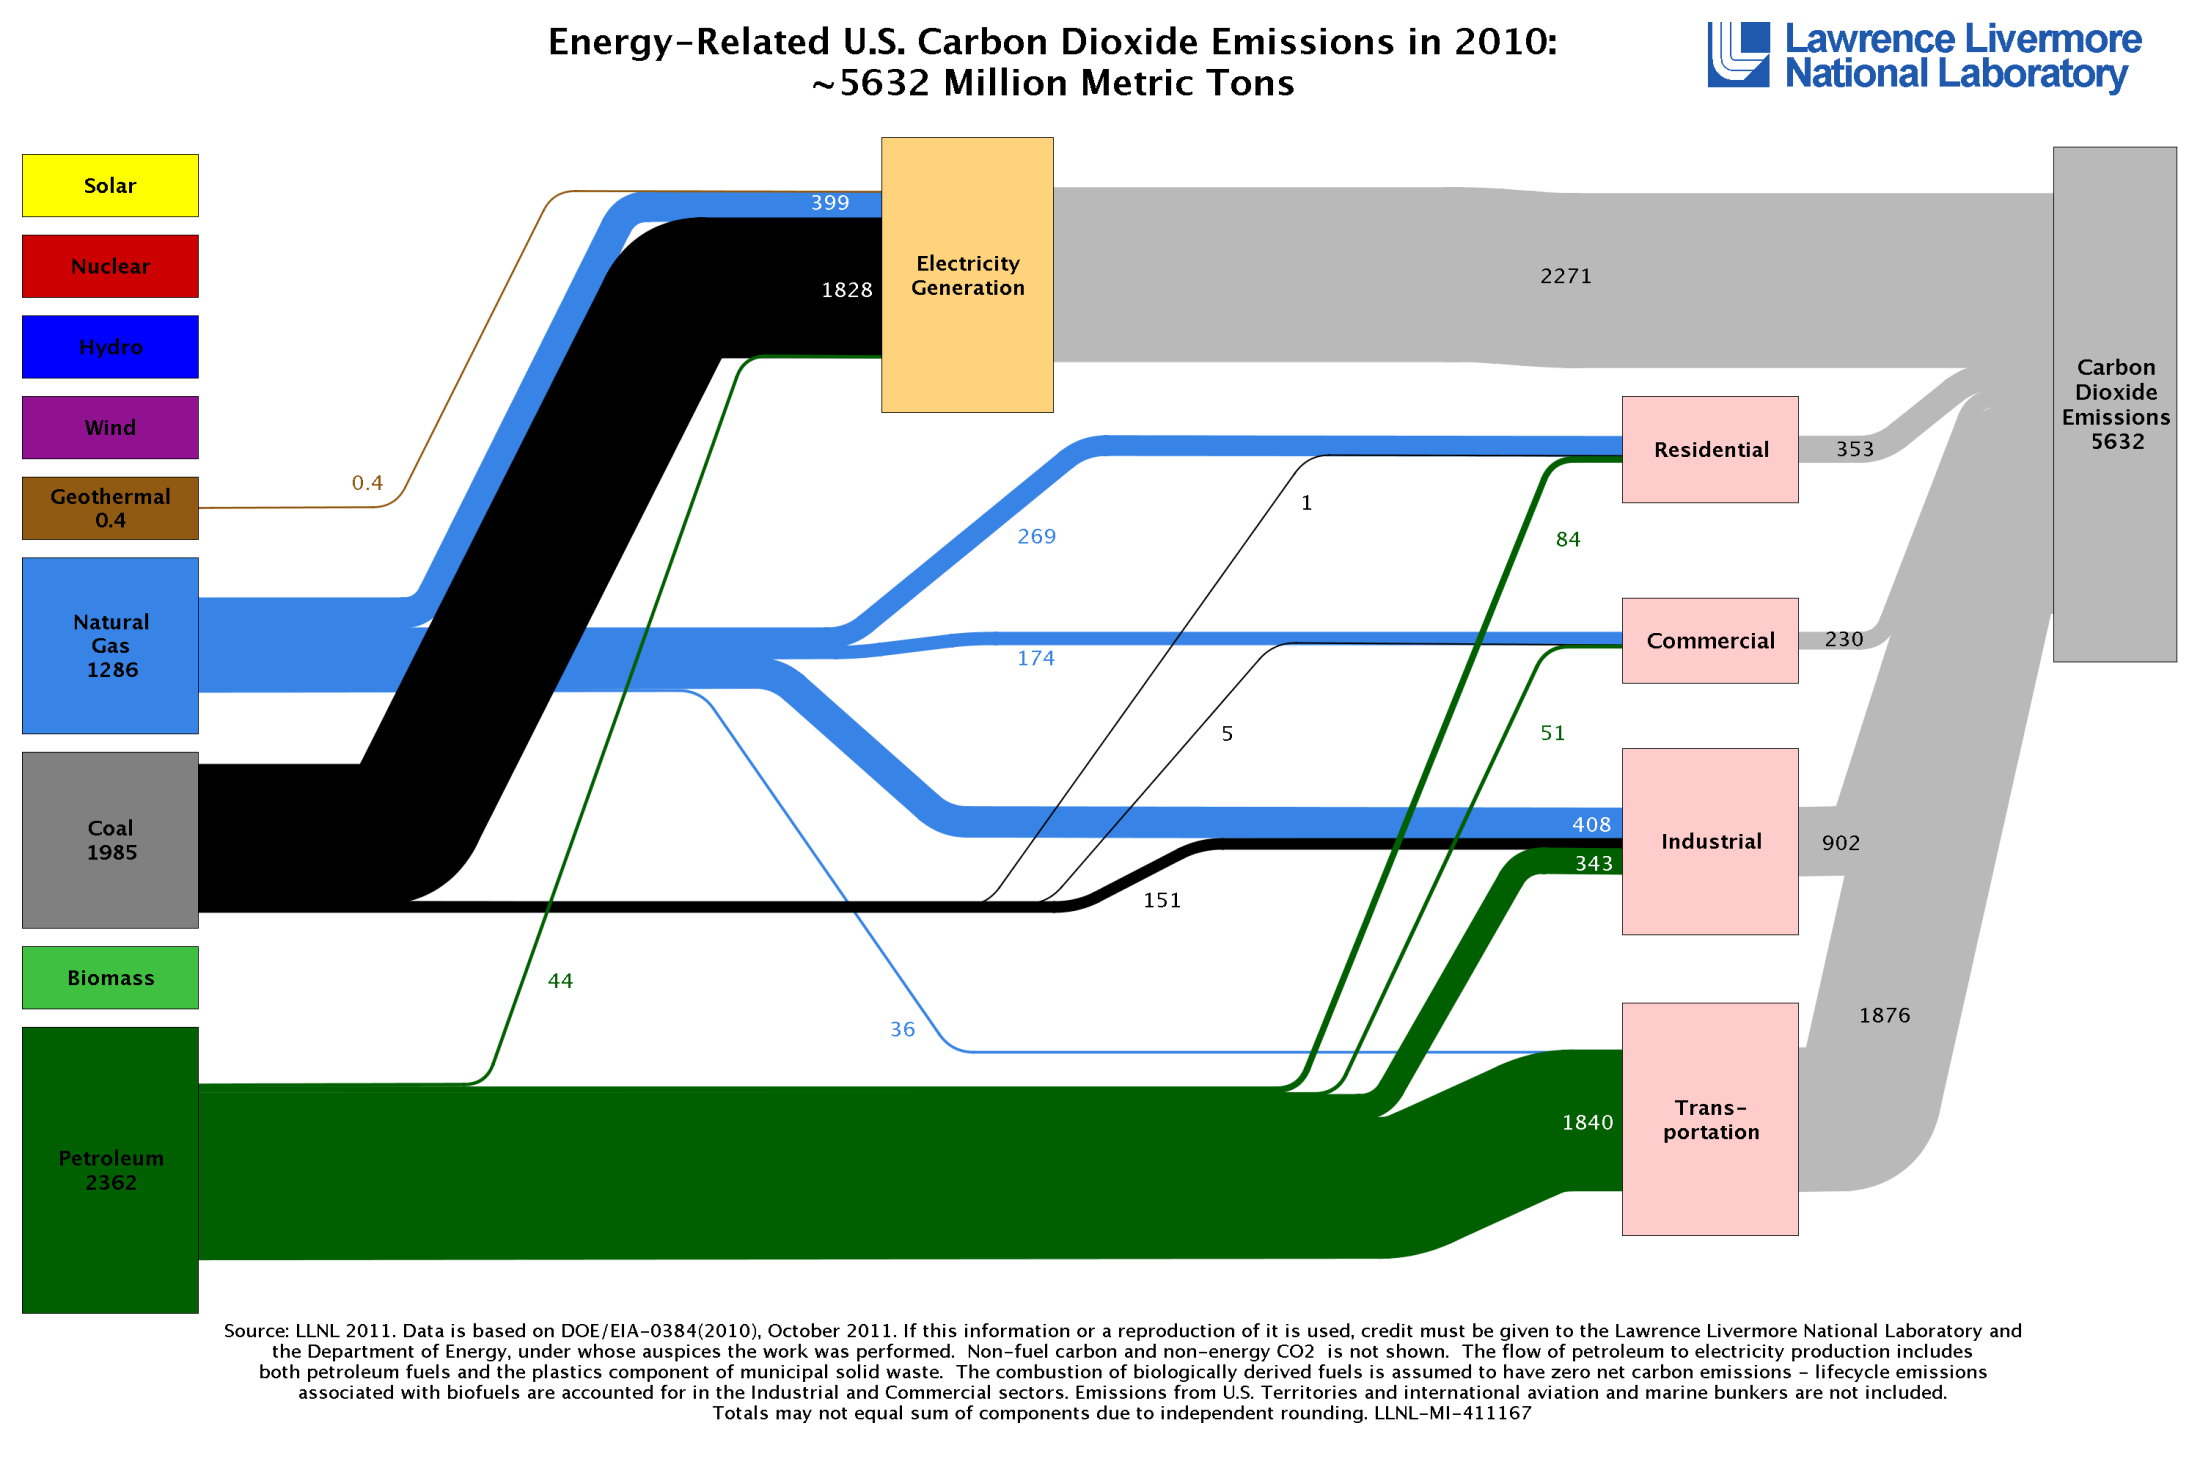 GHG emissions originate from fossil fuels consumed in